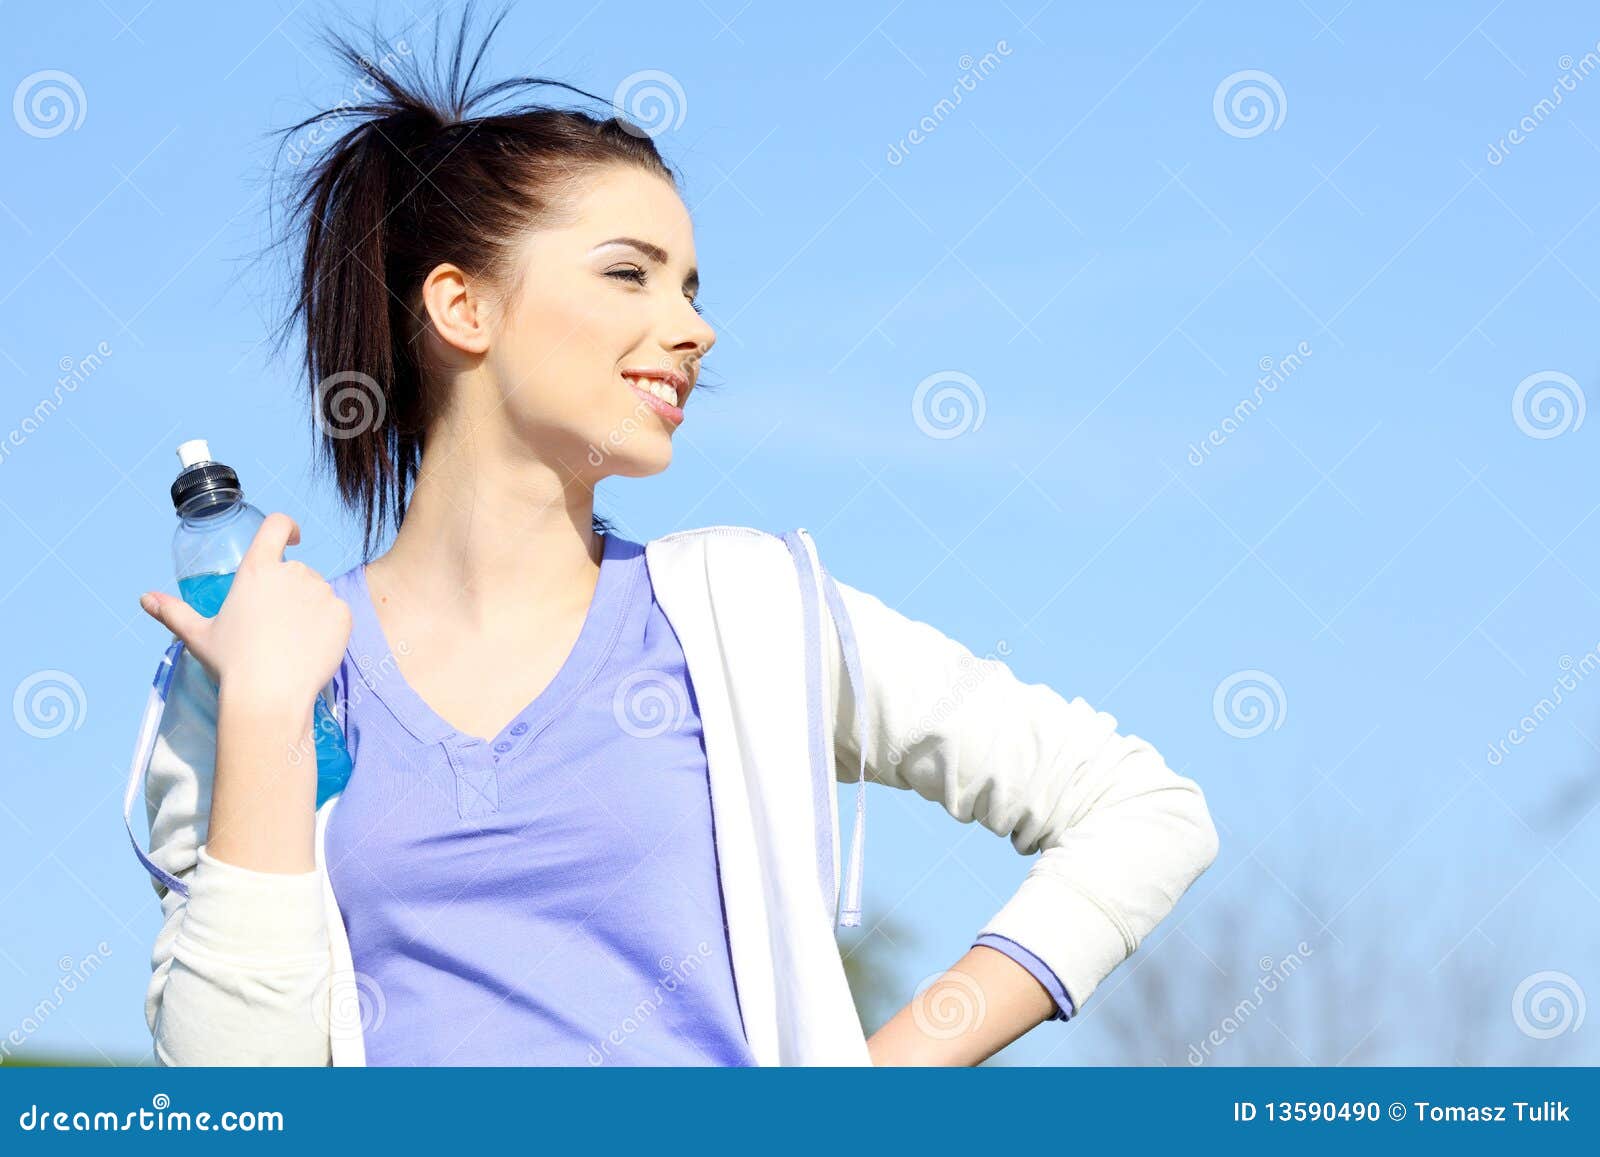 Fitness girl in park. stock photo. Image of adult, beautiful - 13590490